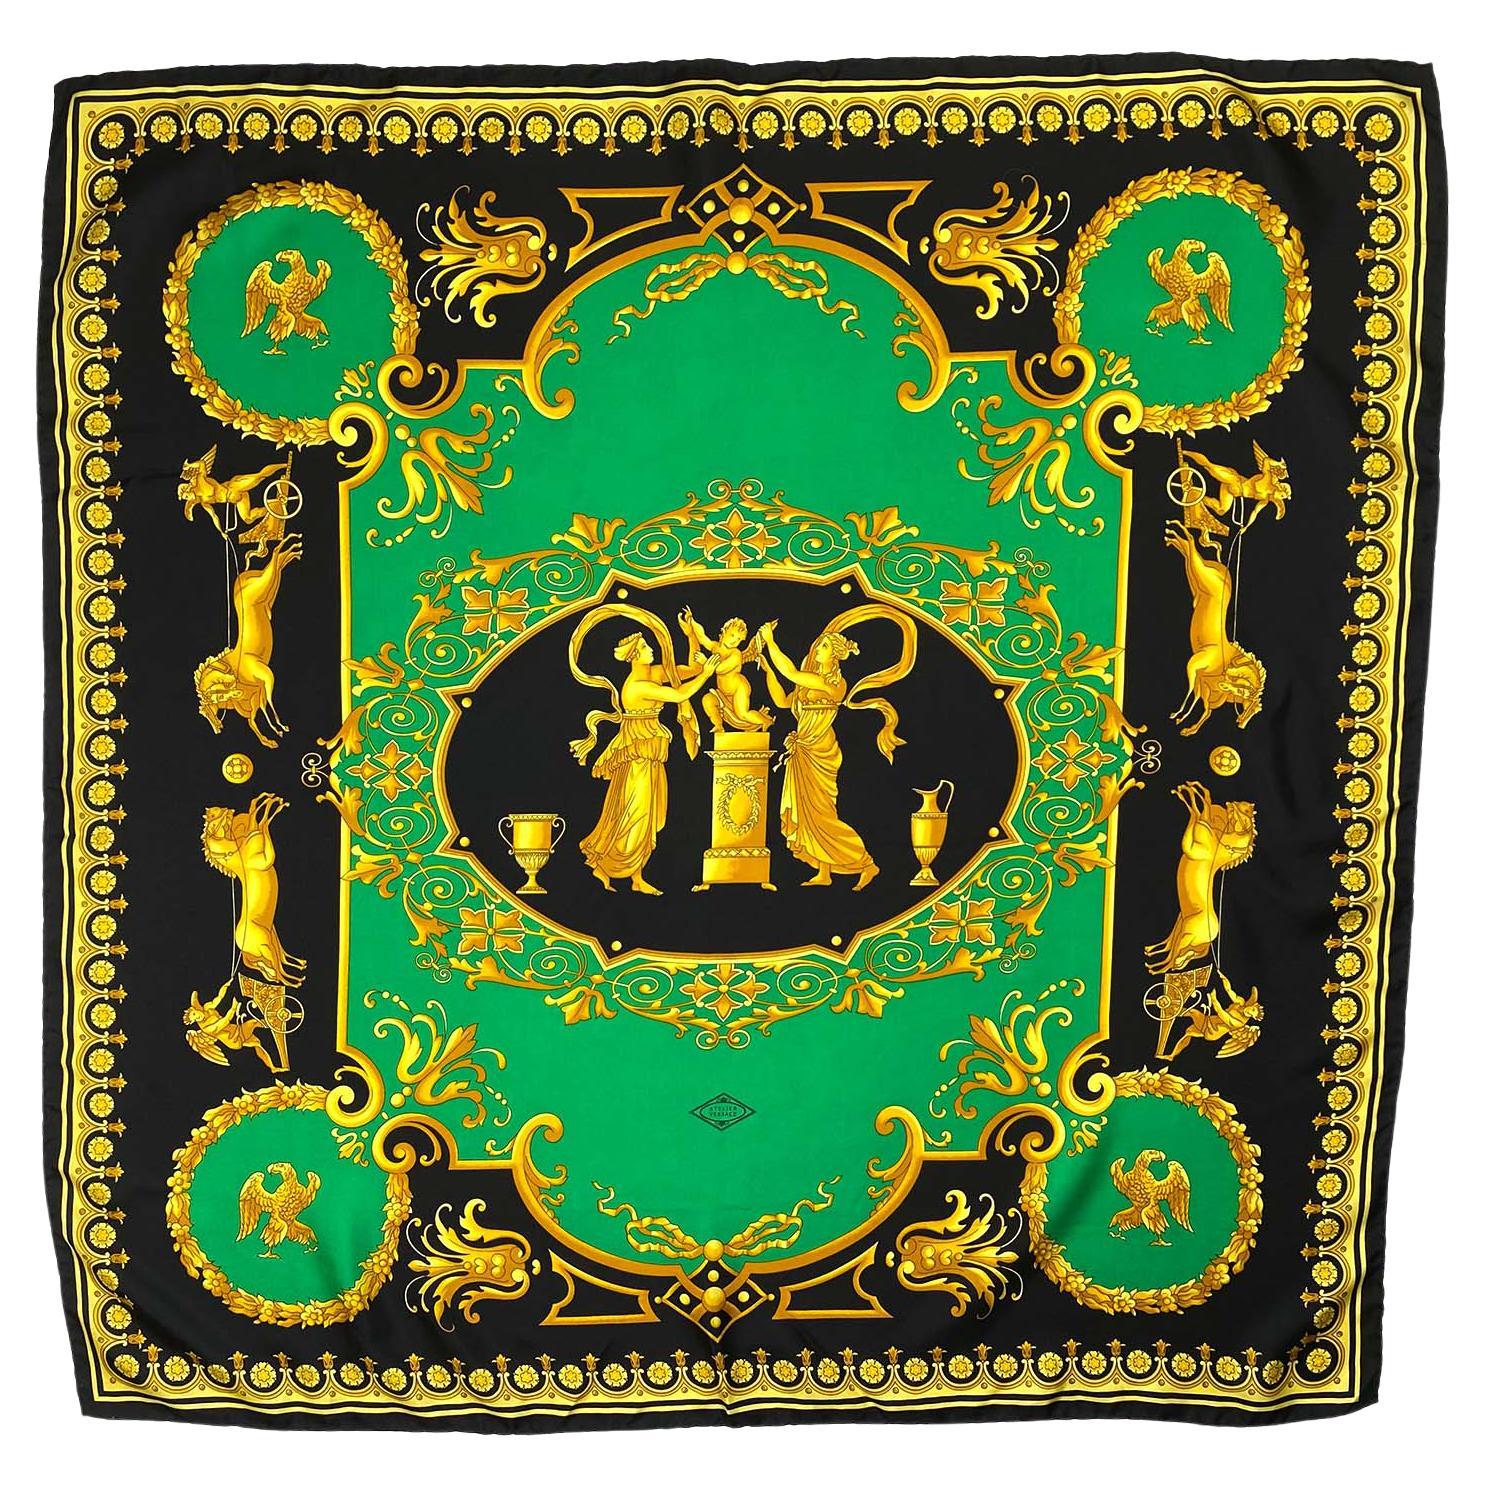 Early 1990s Atelier Versace Green and Gold Baroque Print Square Silk Scarf